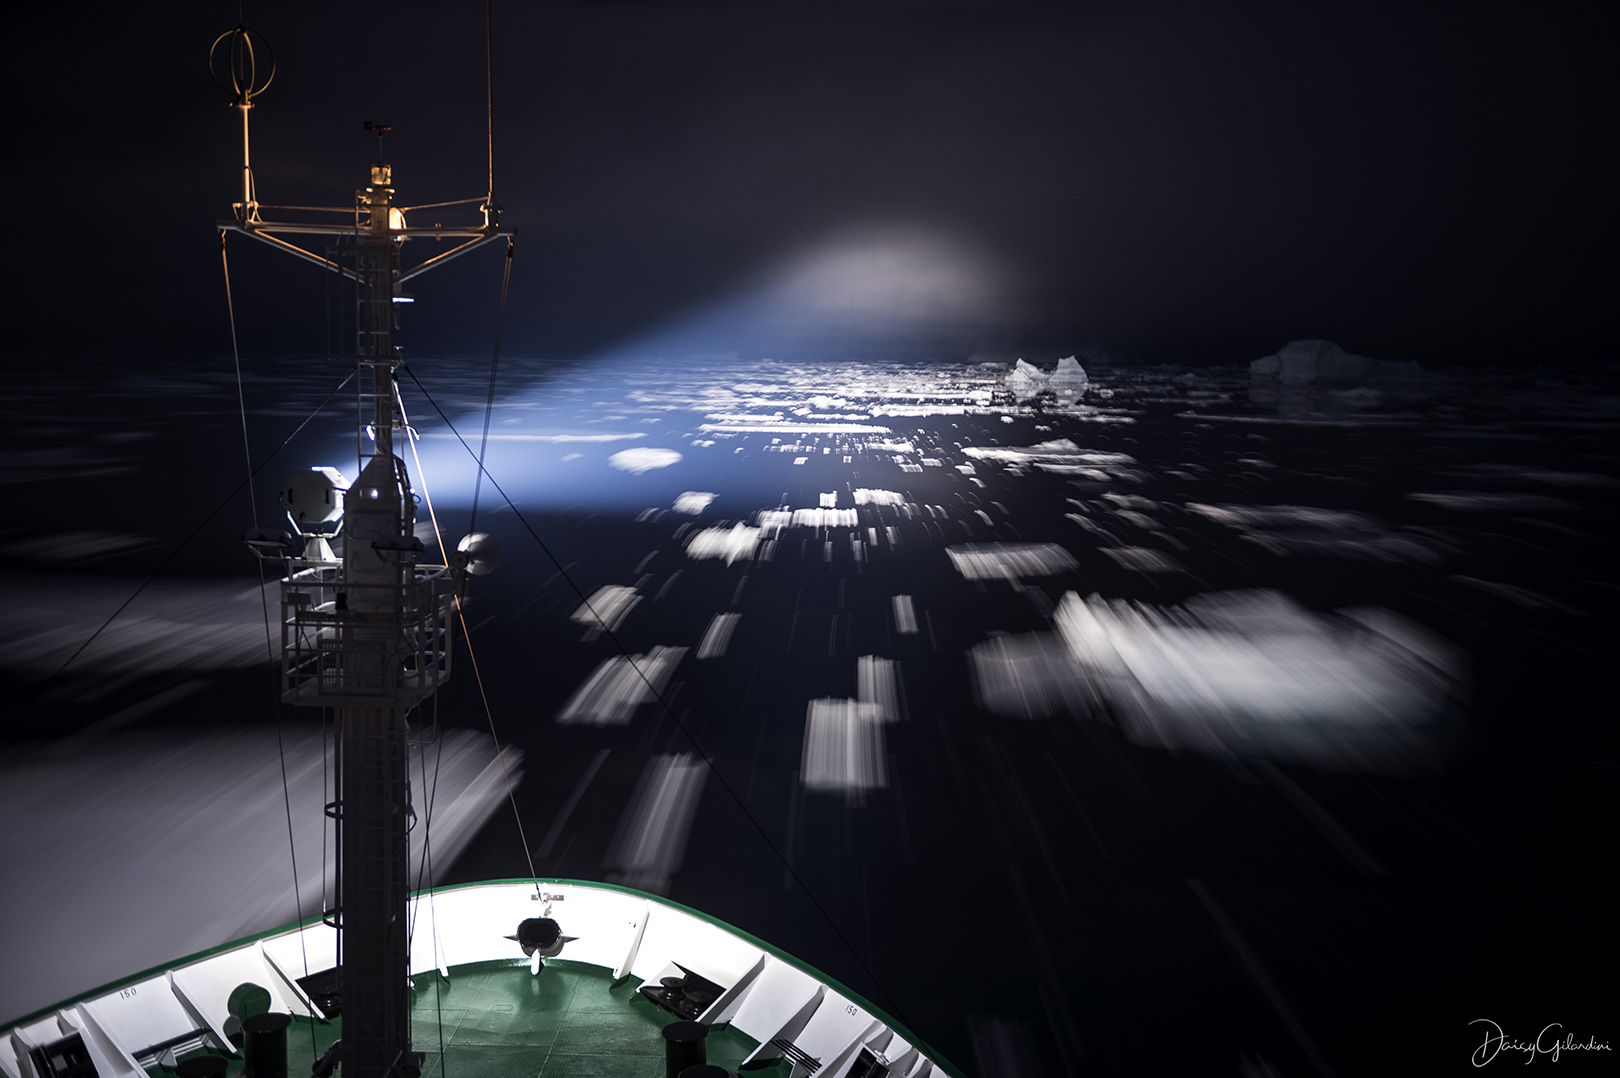 A beam of light shining from the mast on a ship out over sea ice.